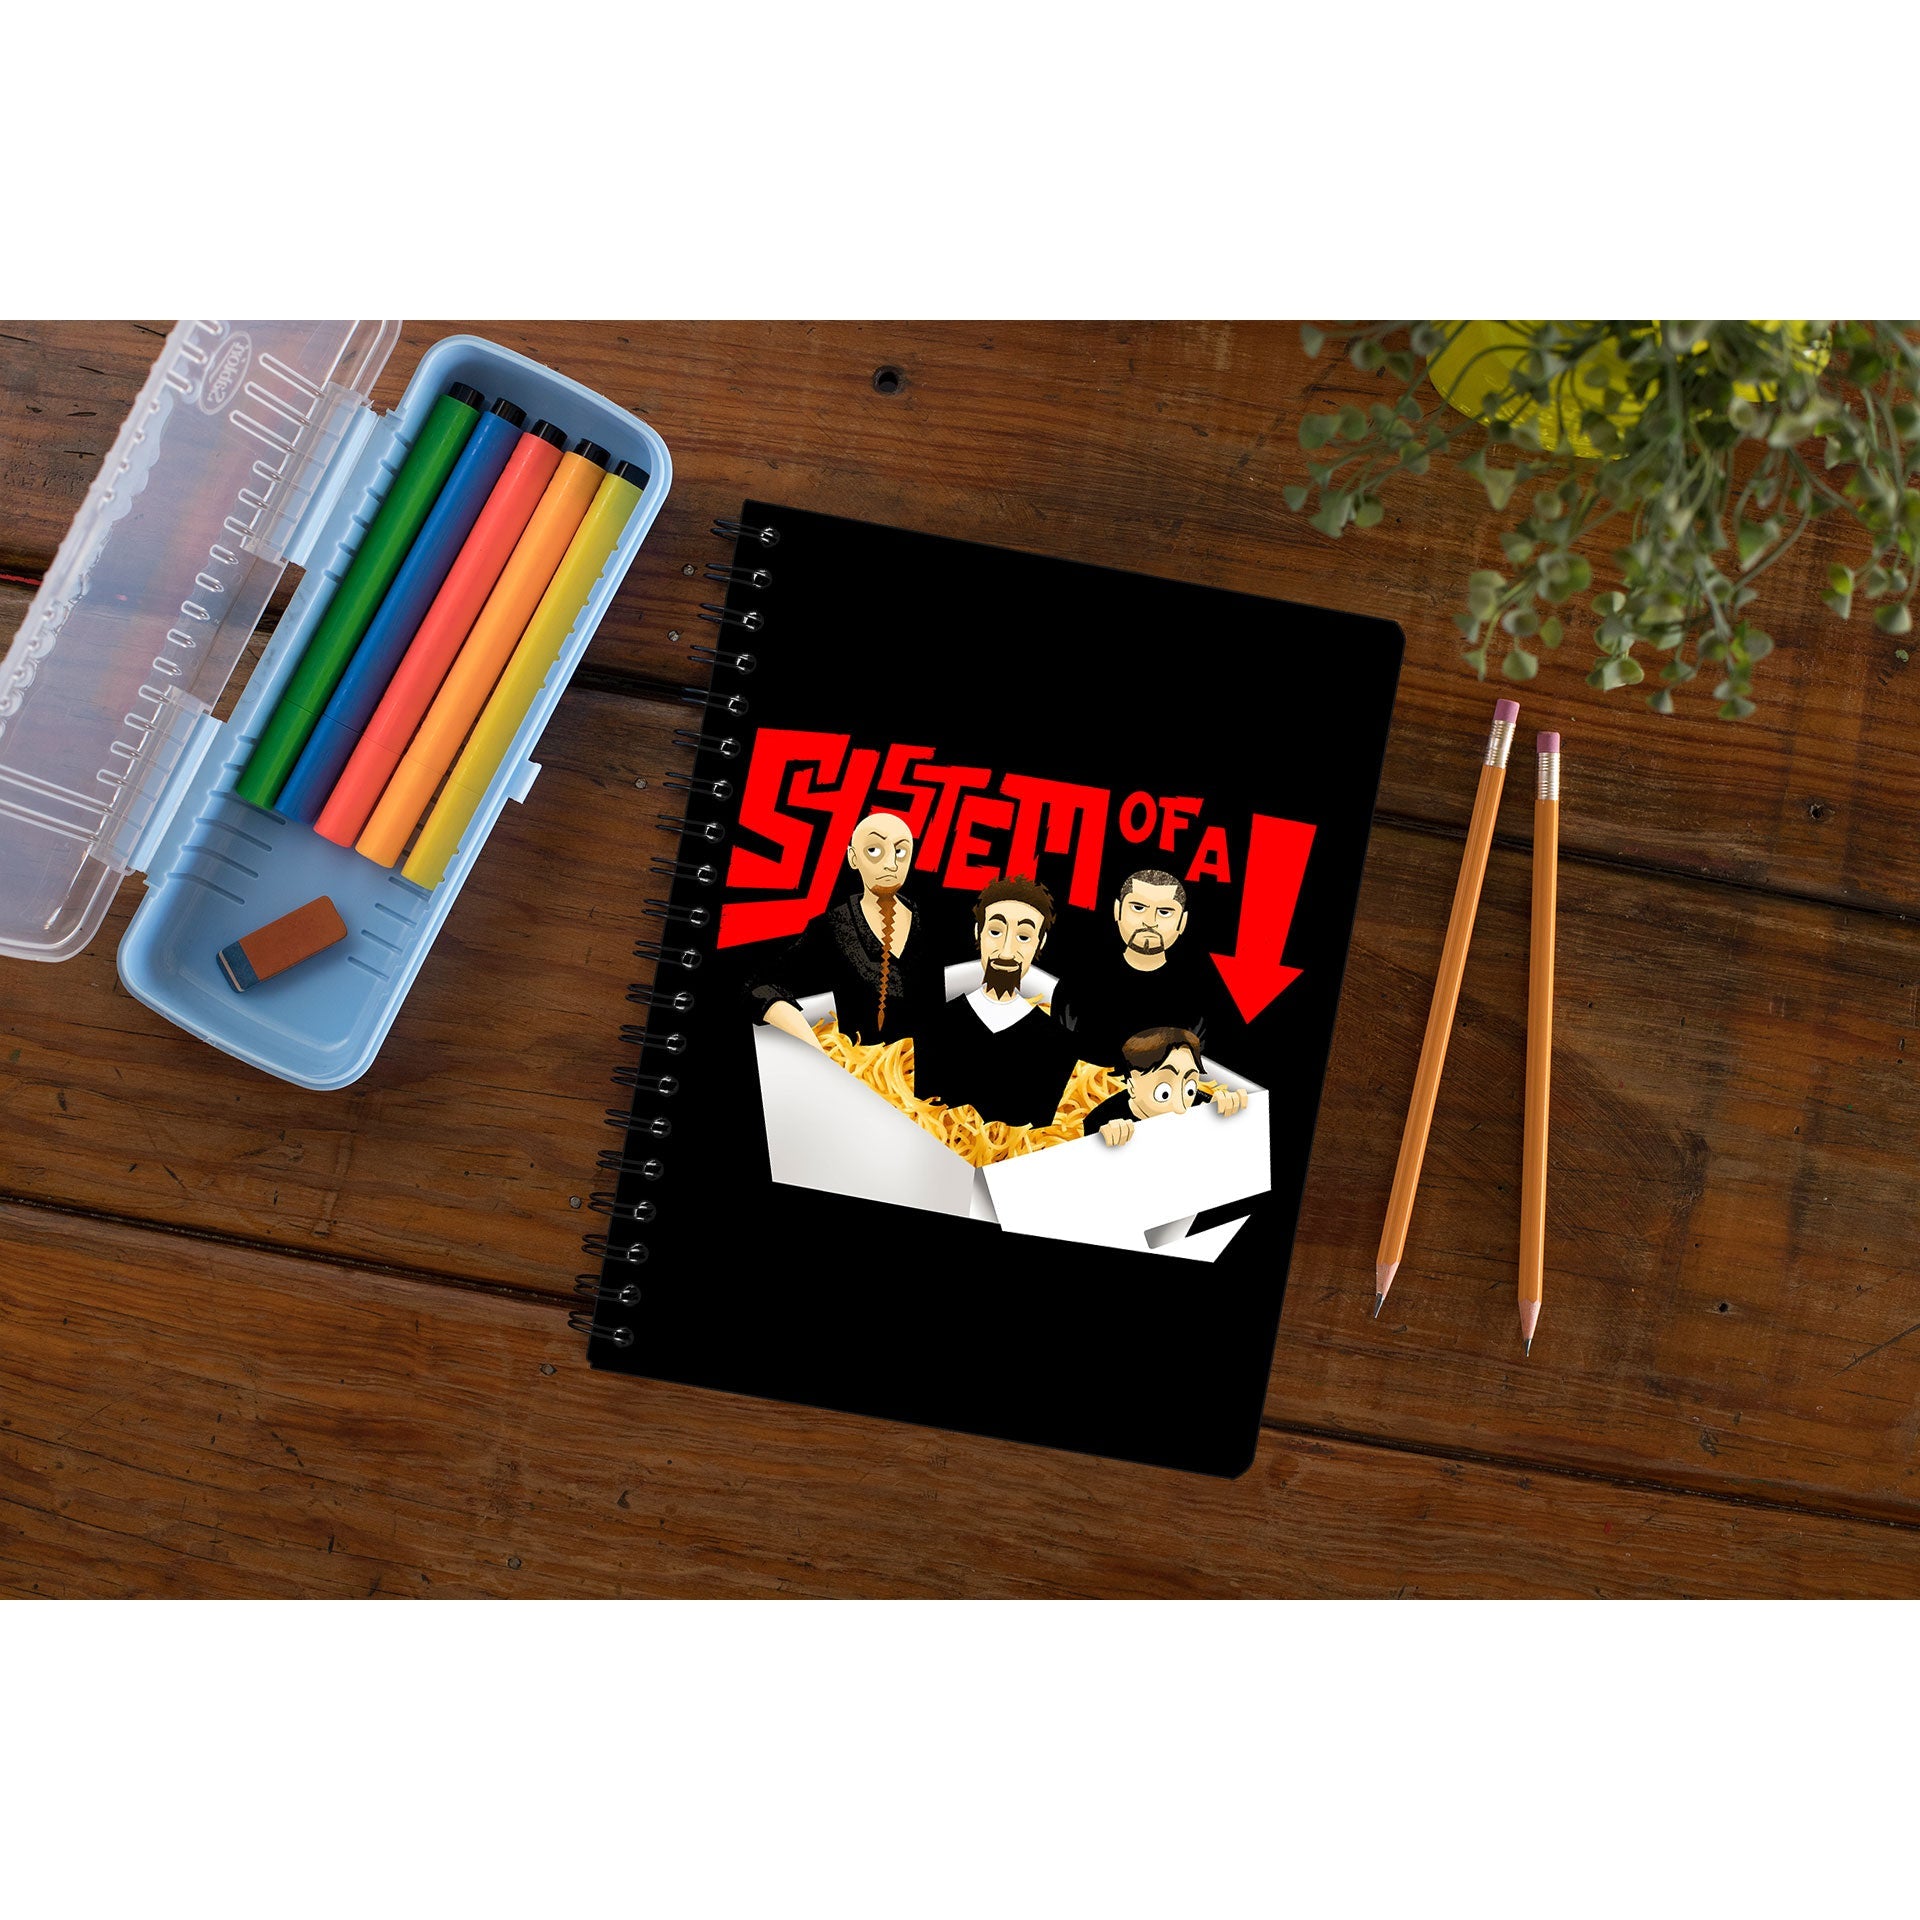 system of a down chopsuey cartoon notebook notepad diary buy online united states of america usa the banyan tee tbt unruled